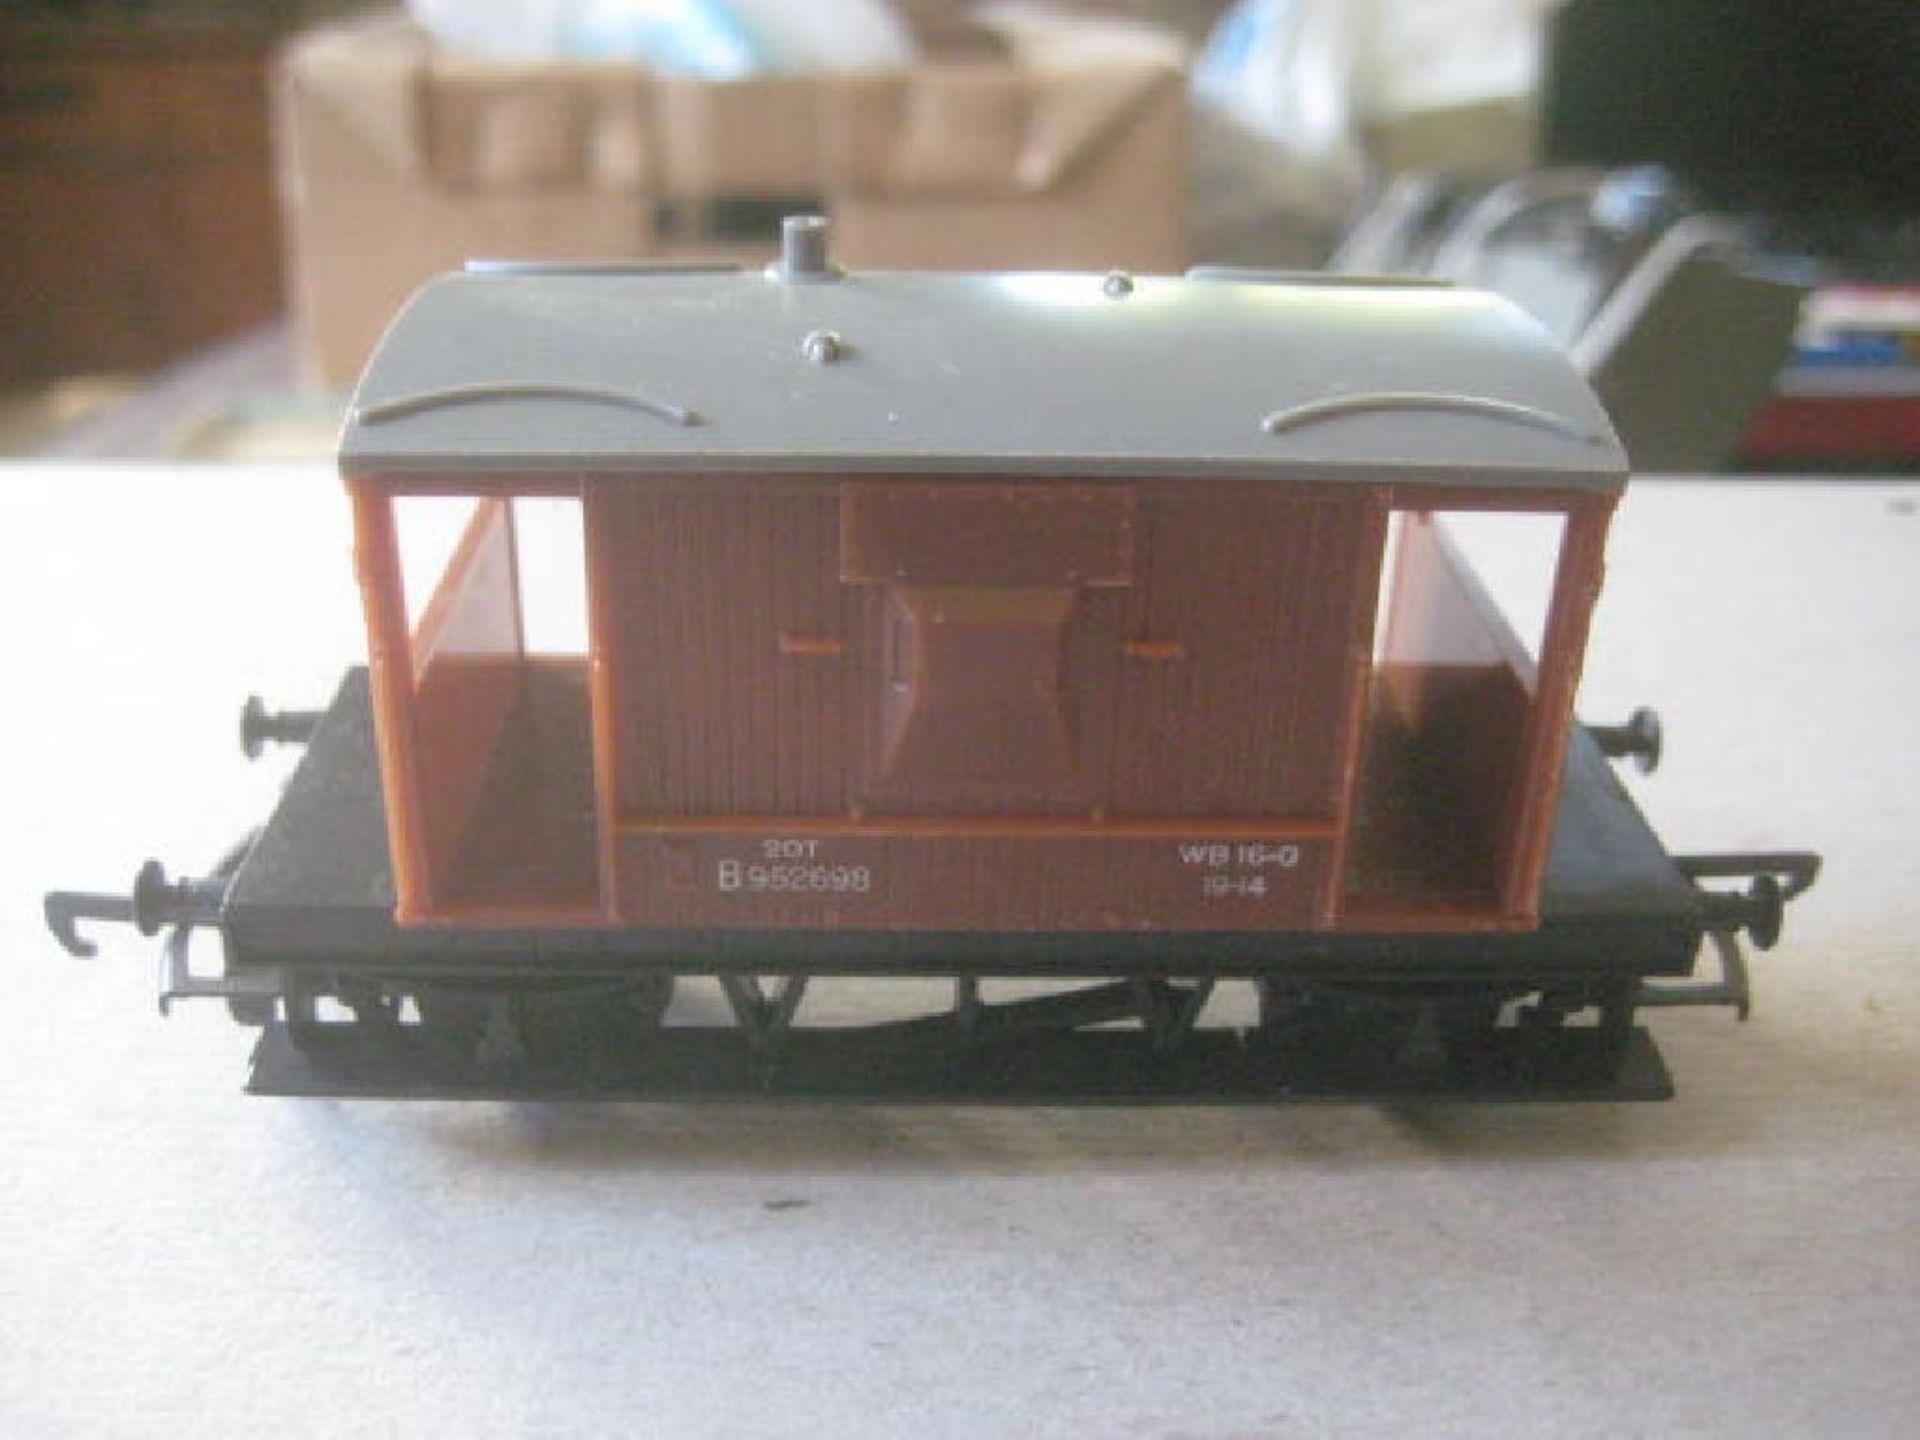 Vintage Triang Train Carriage - Image 2 of 11